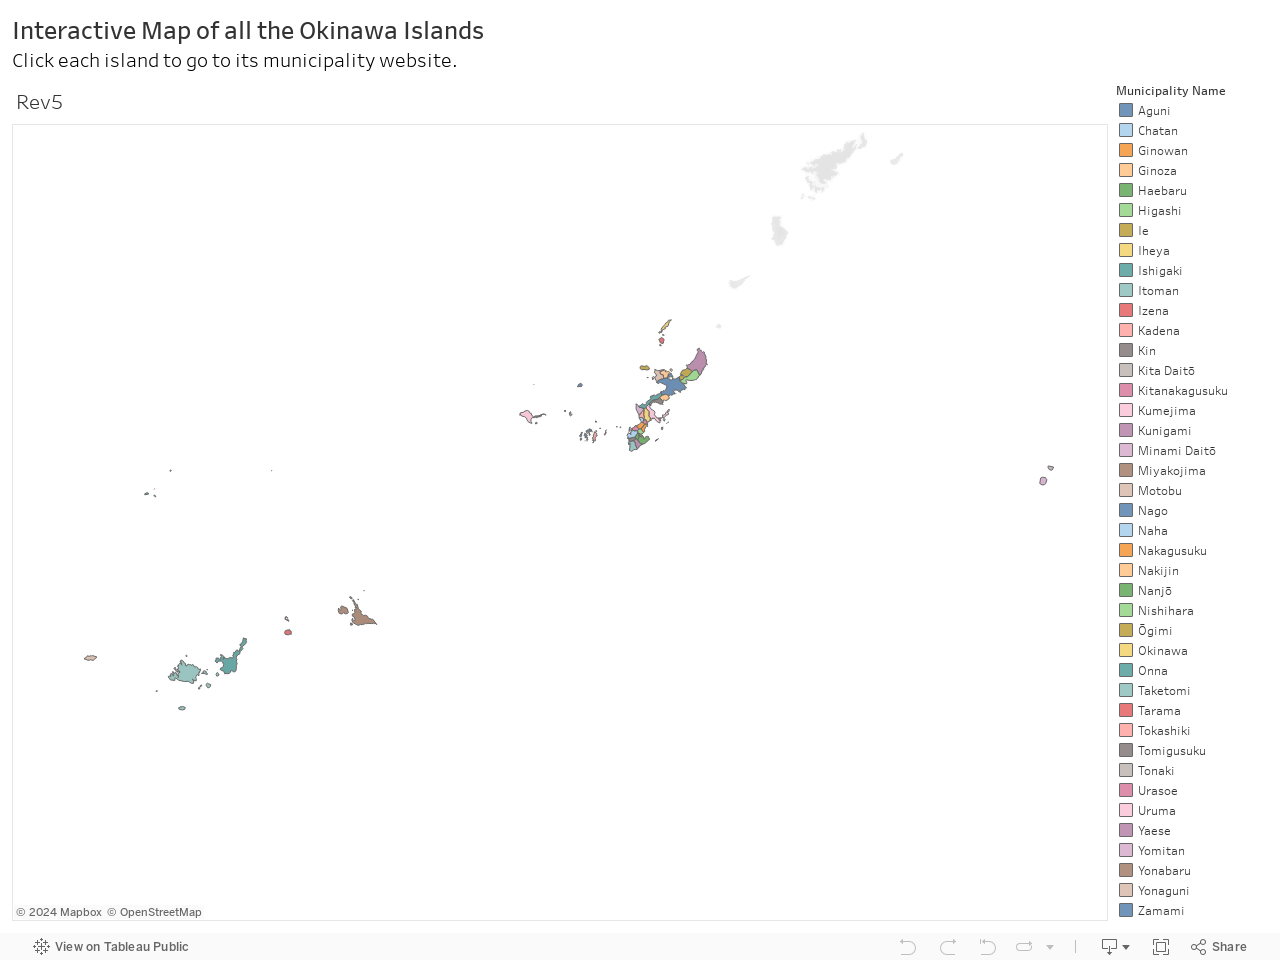 Interactive Map of all the Okinawa IslandsClick each island to go to its municipality website. 